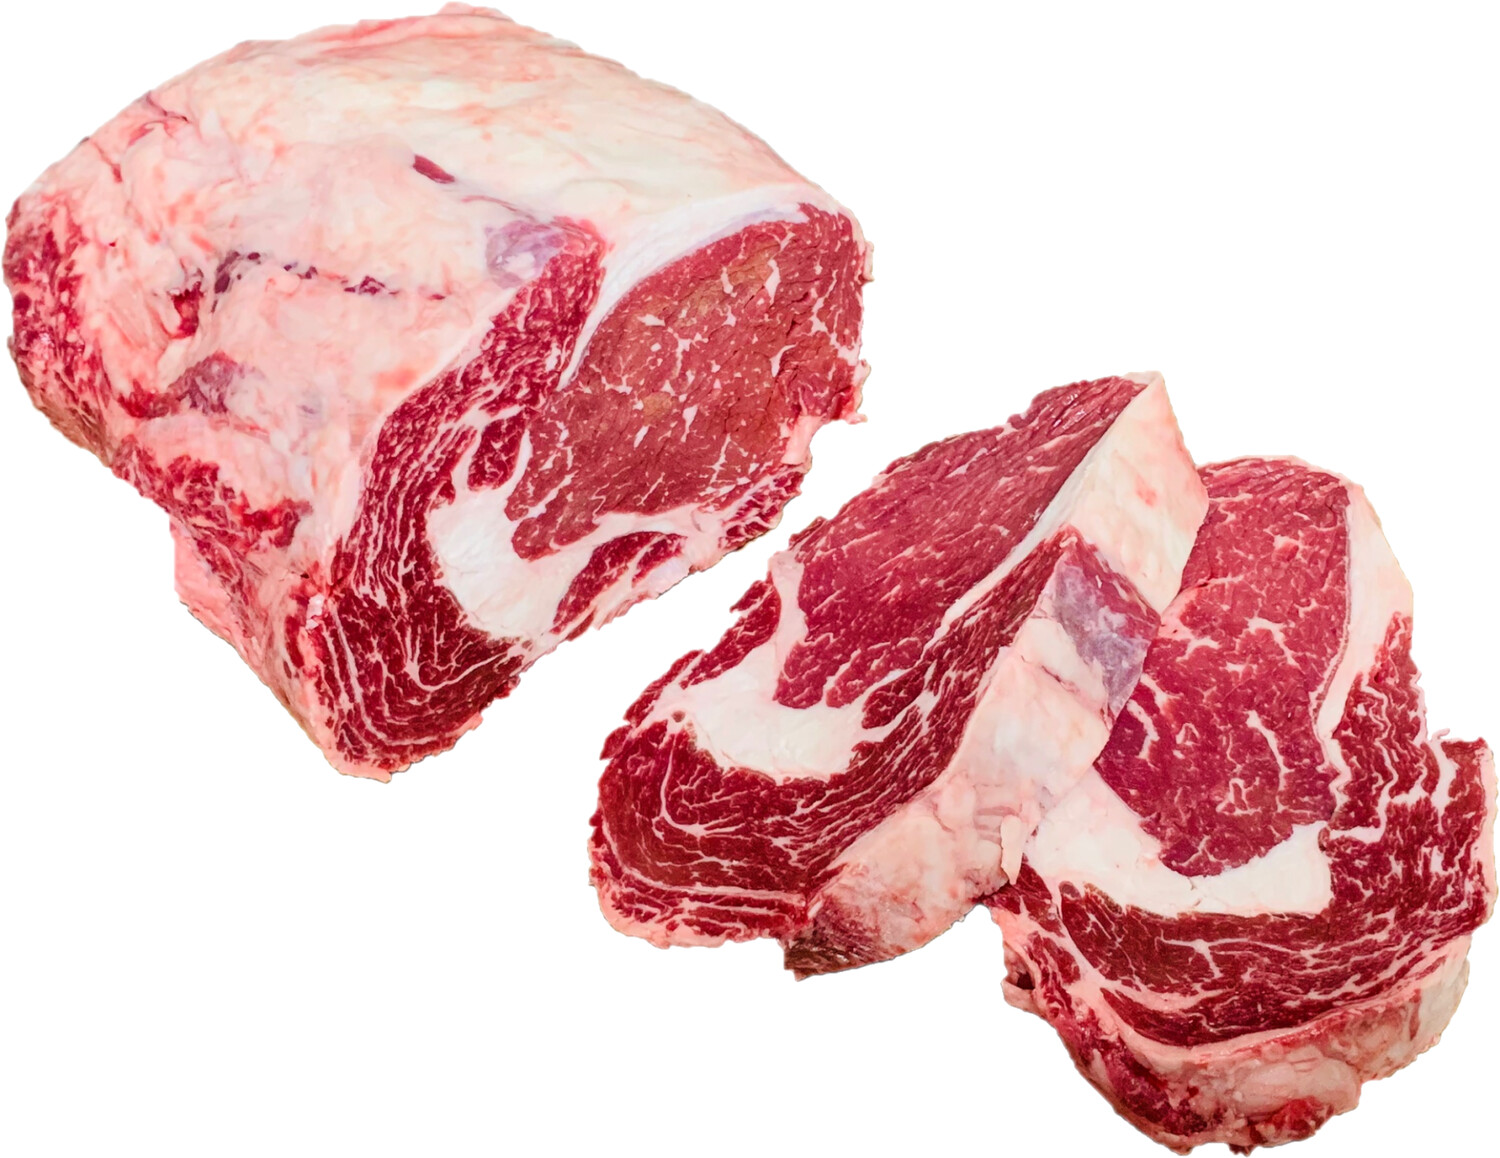 Beef Scotch Fillet (Cube Roll) - Angus Best Quality (1.5kg - 2kg Portion)